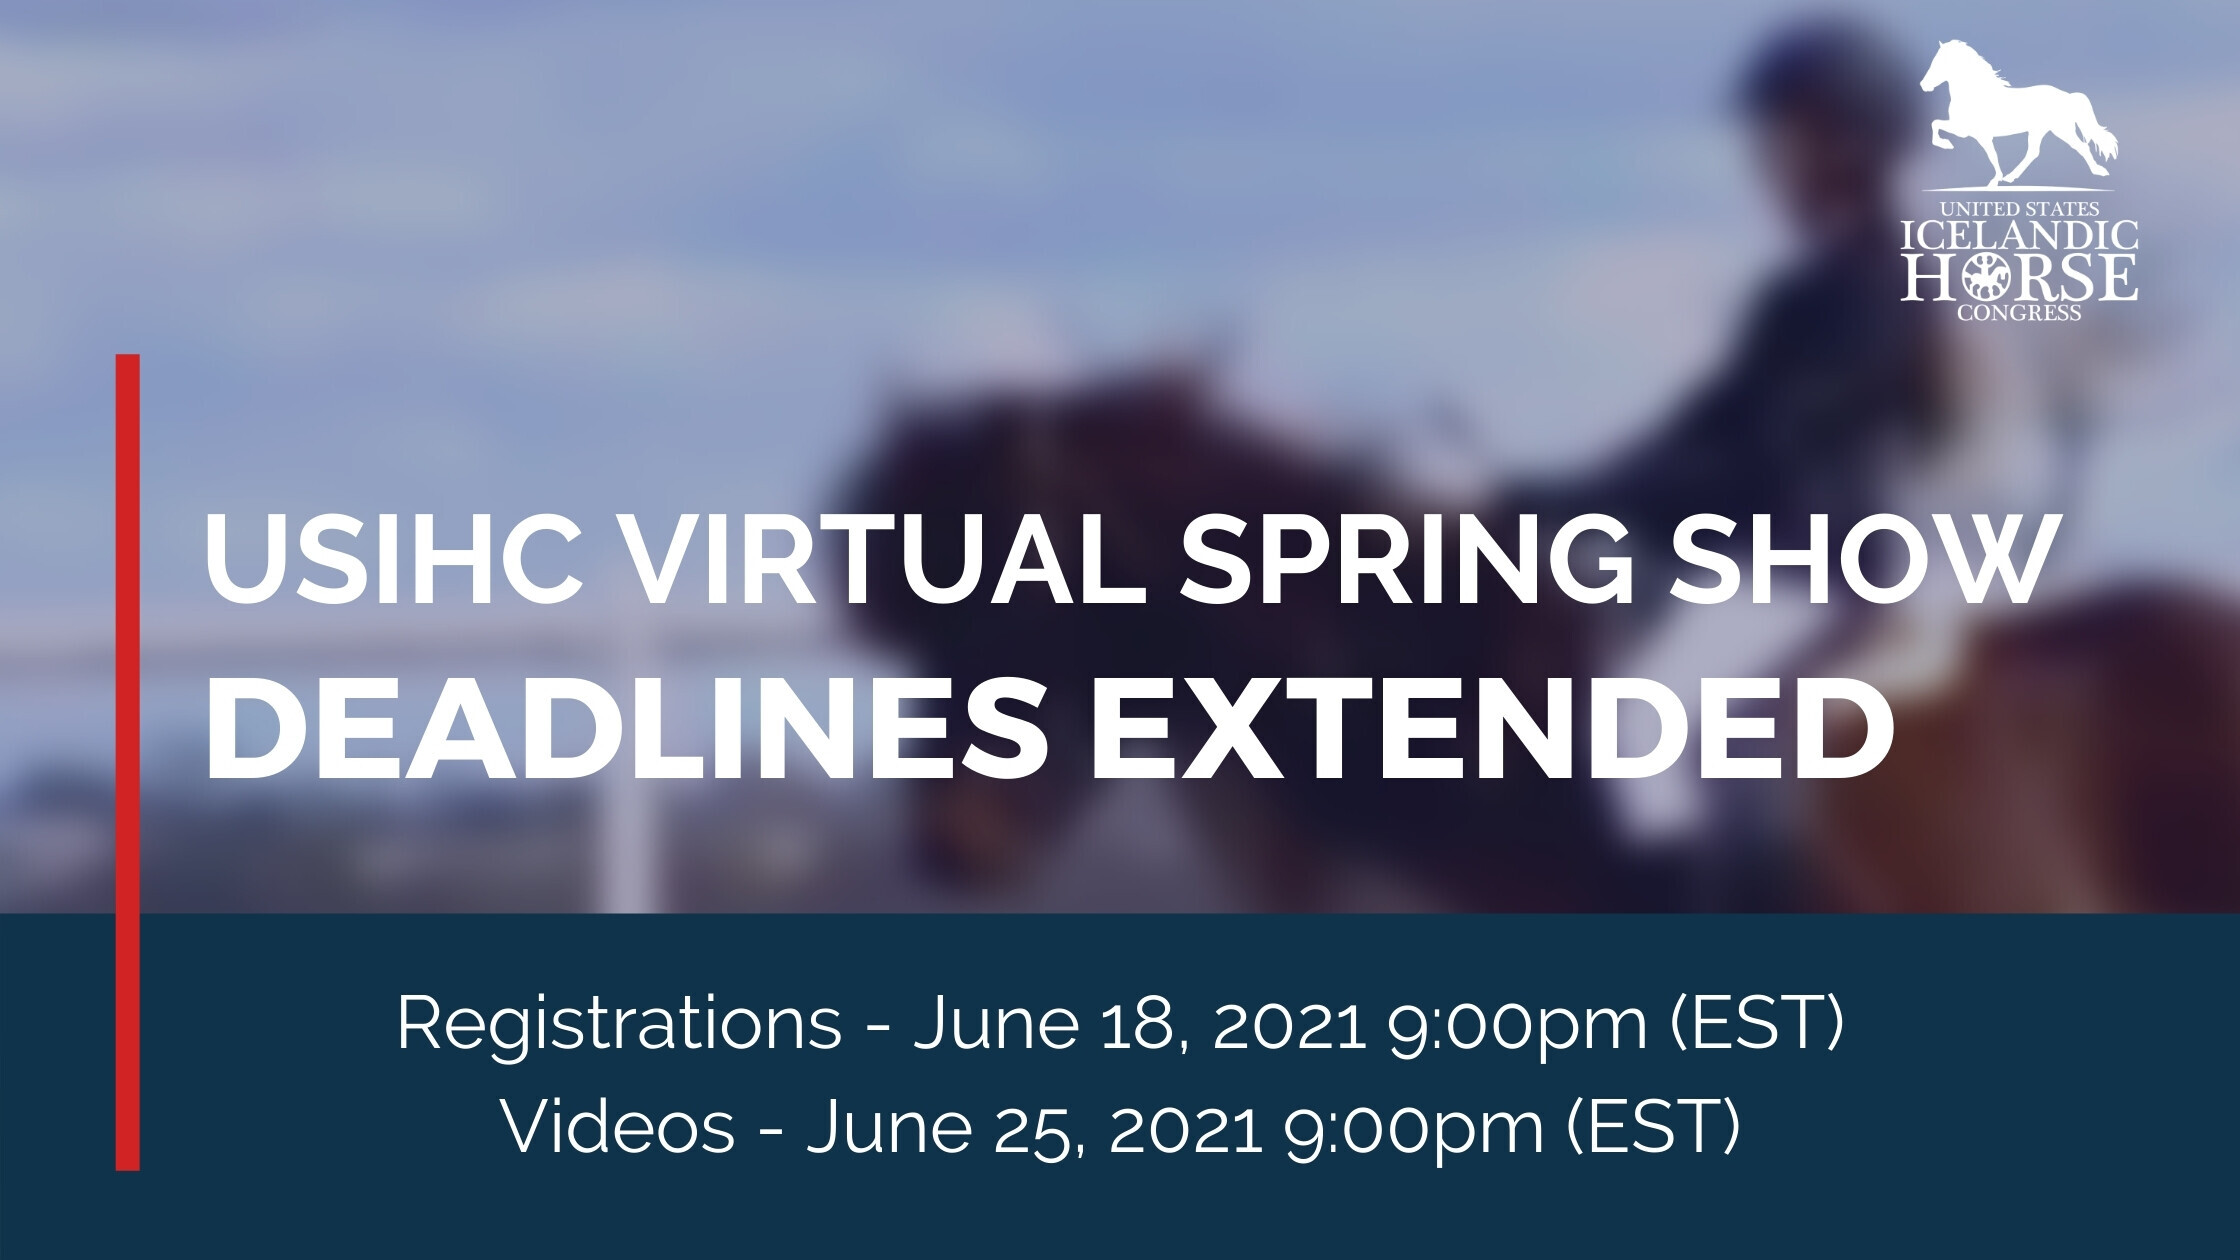 deadlines extended for the virtual spring show